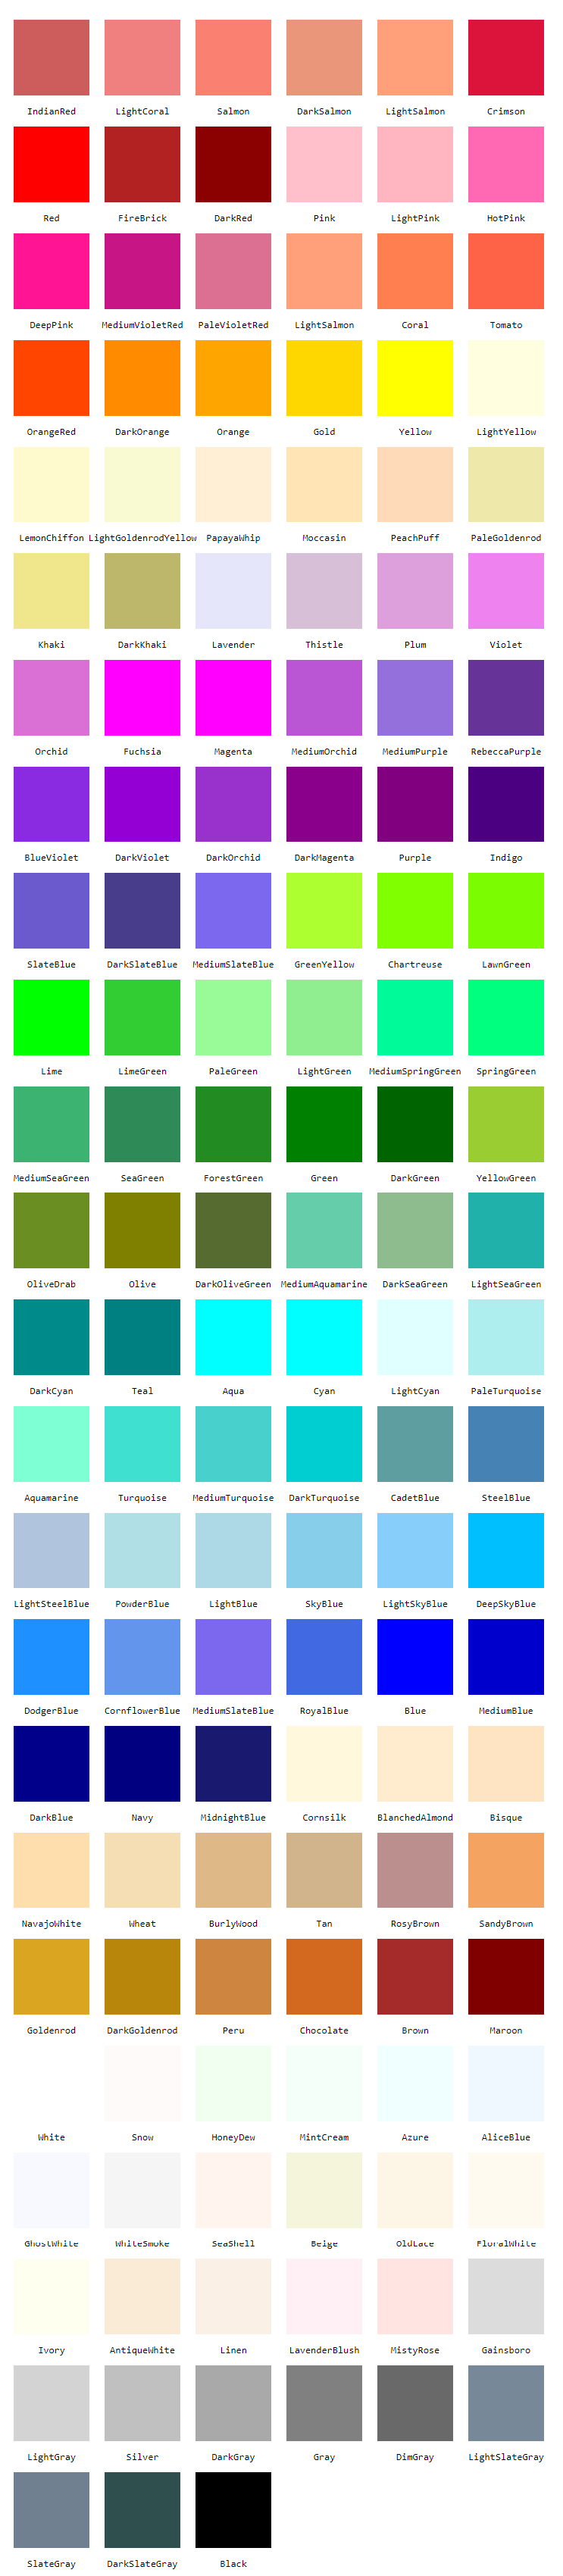 CodePen-colored-squares-2